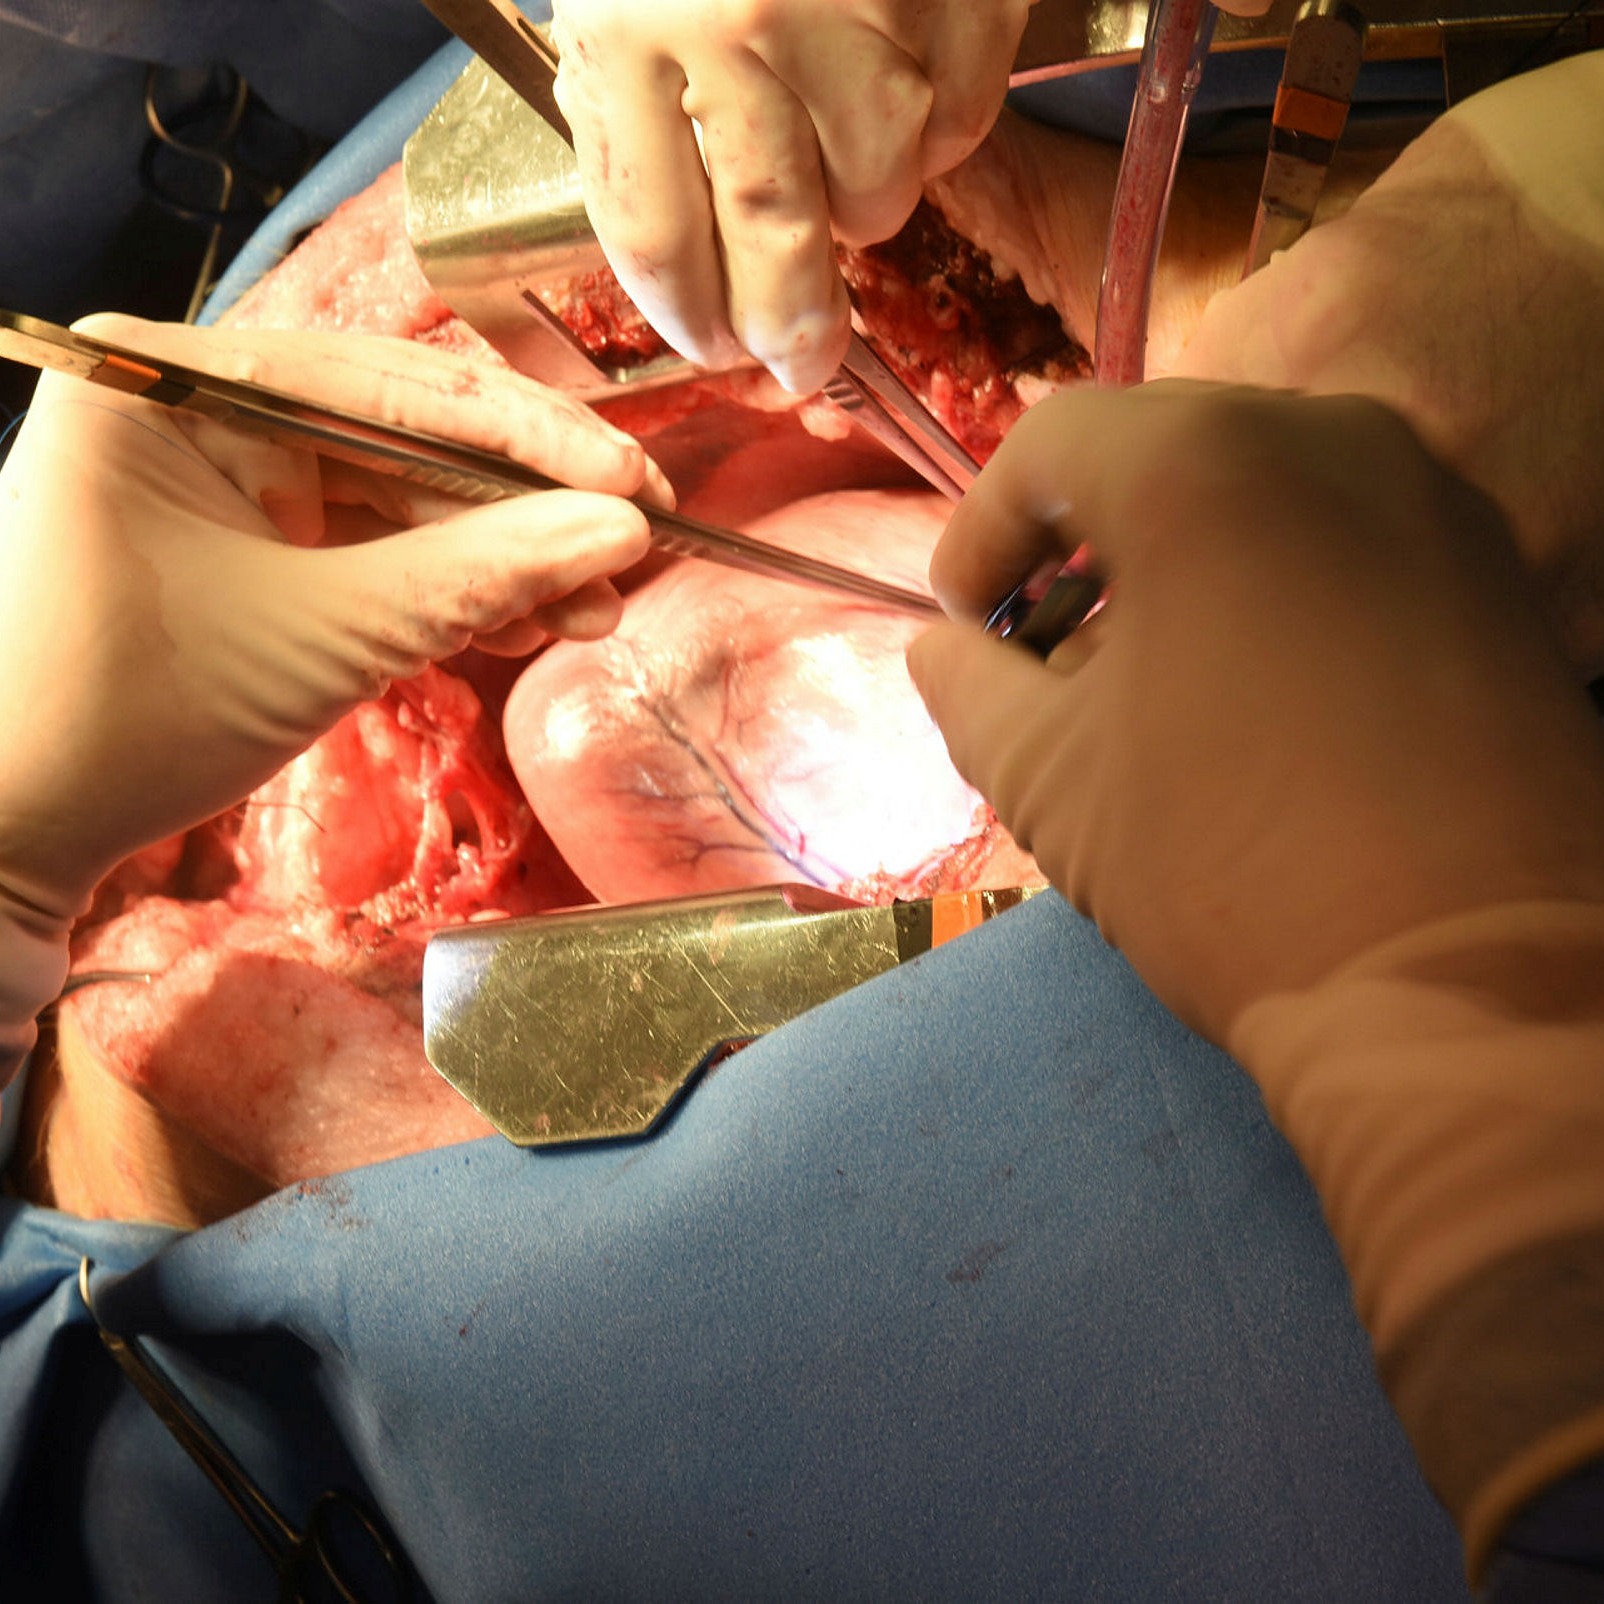 A surgeon operates on a pig prior to the removal of its heart